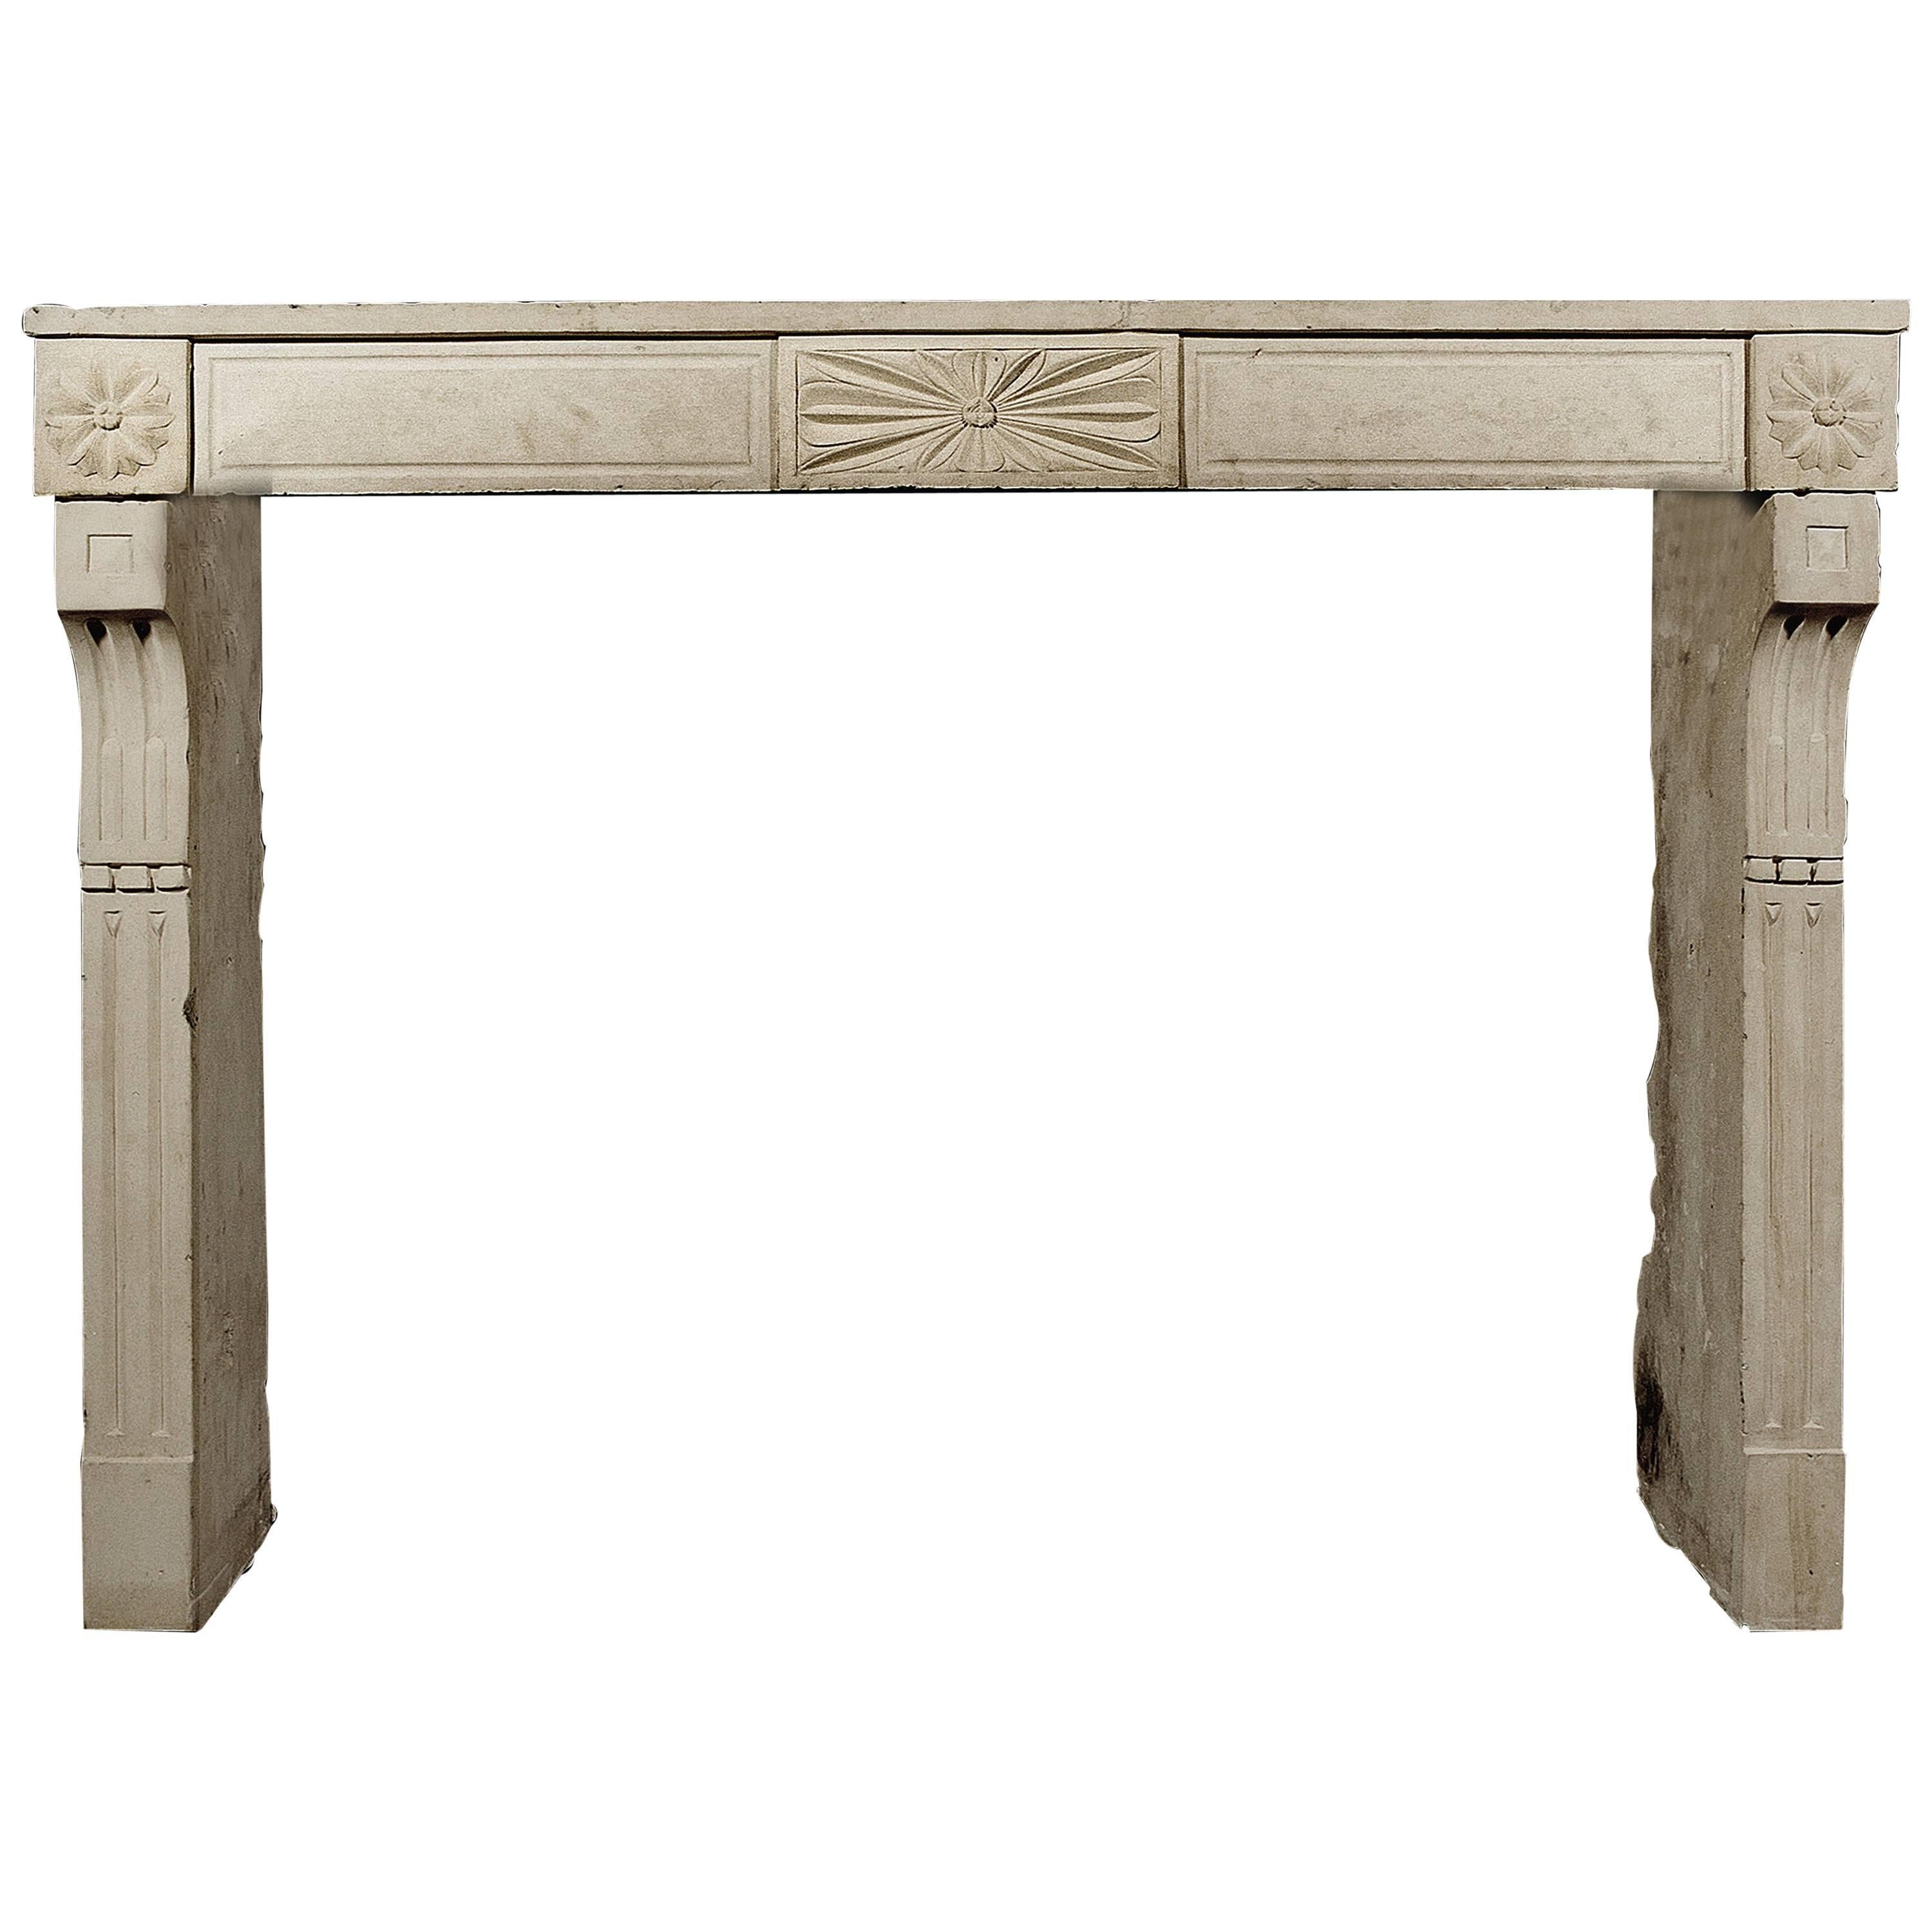 Rustic, 18th Century French Louis XVI Stone Fireplace For Sale